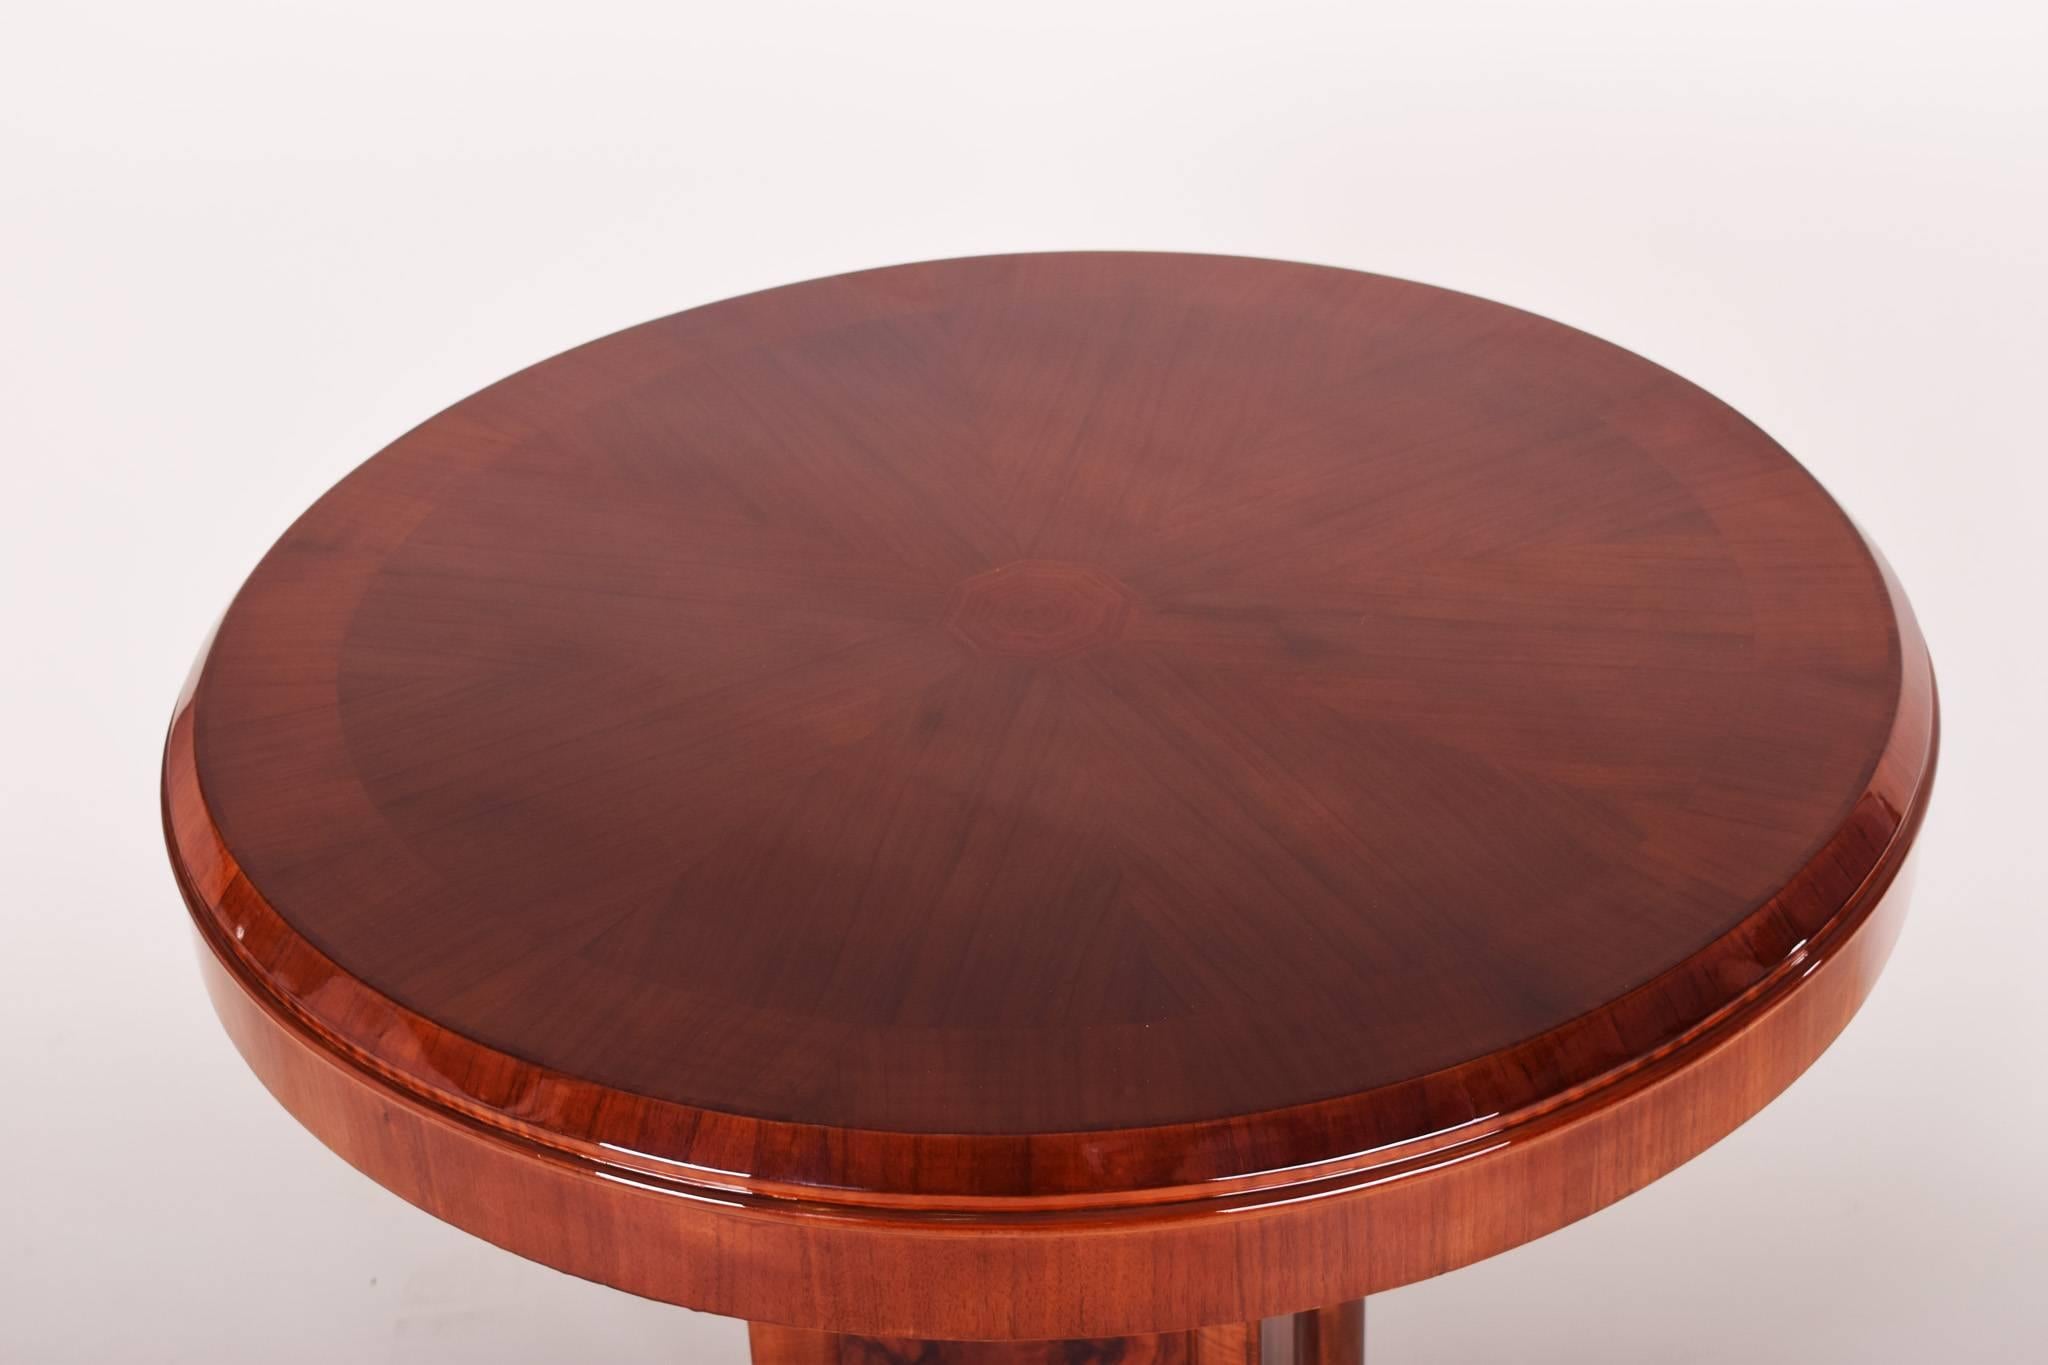 Art Deco table, France.
Completely restored. 
Material: Walnut and palisander.

We guarantee safe a the cheapest air transport from Europe to the whole world within 7 days.
The price is the same as for ship transport but delivery time is really